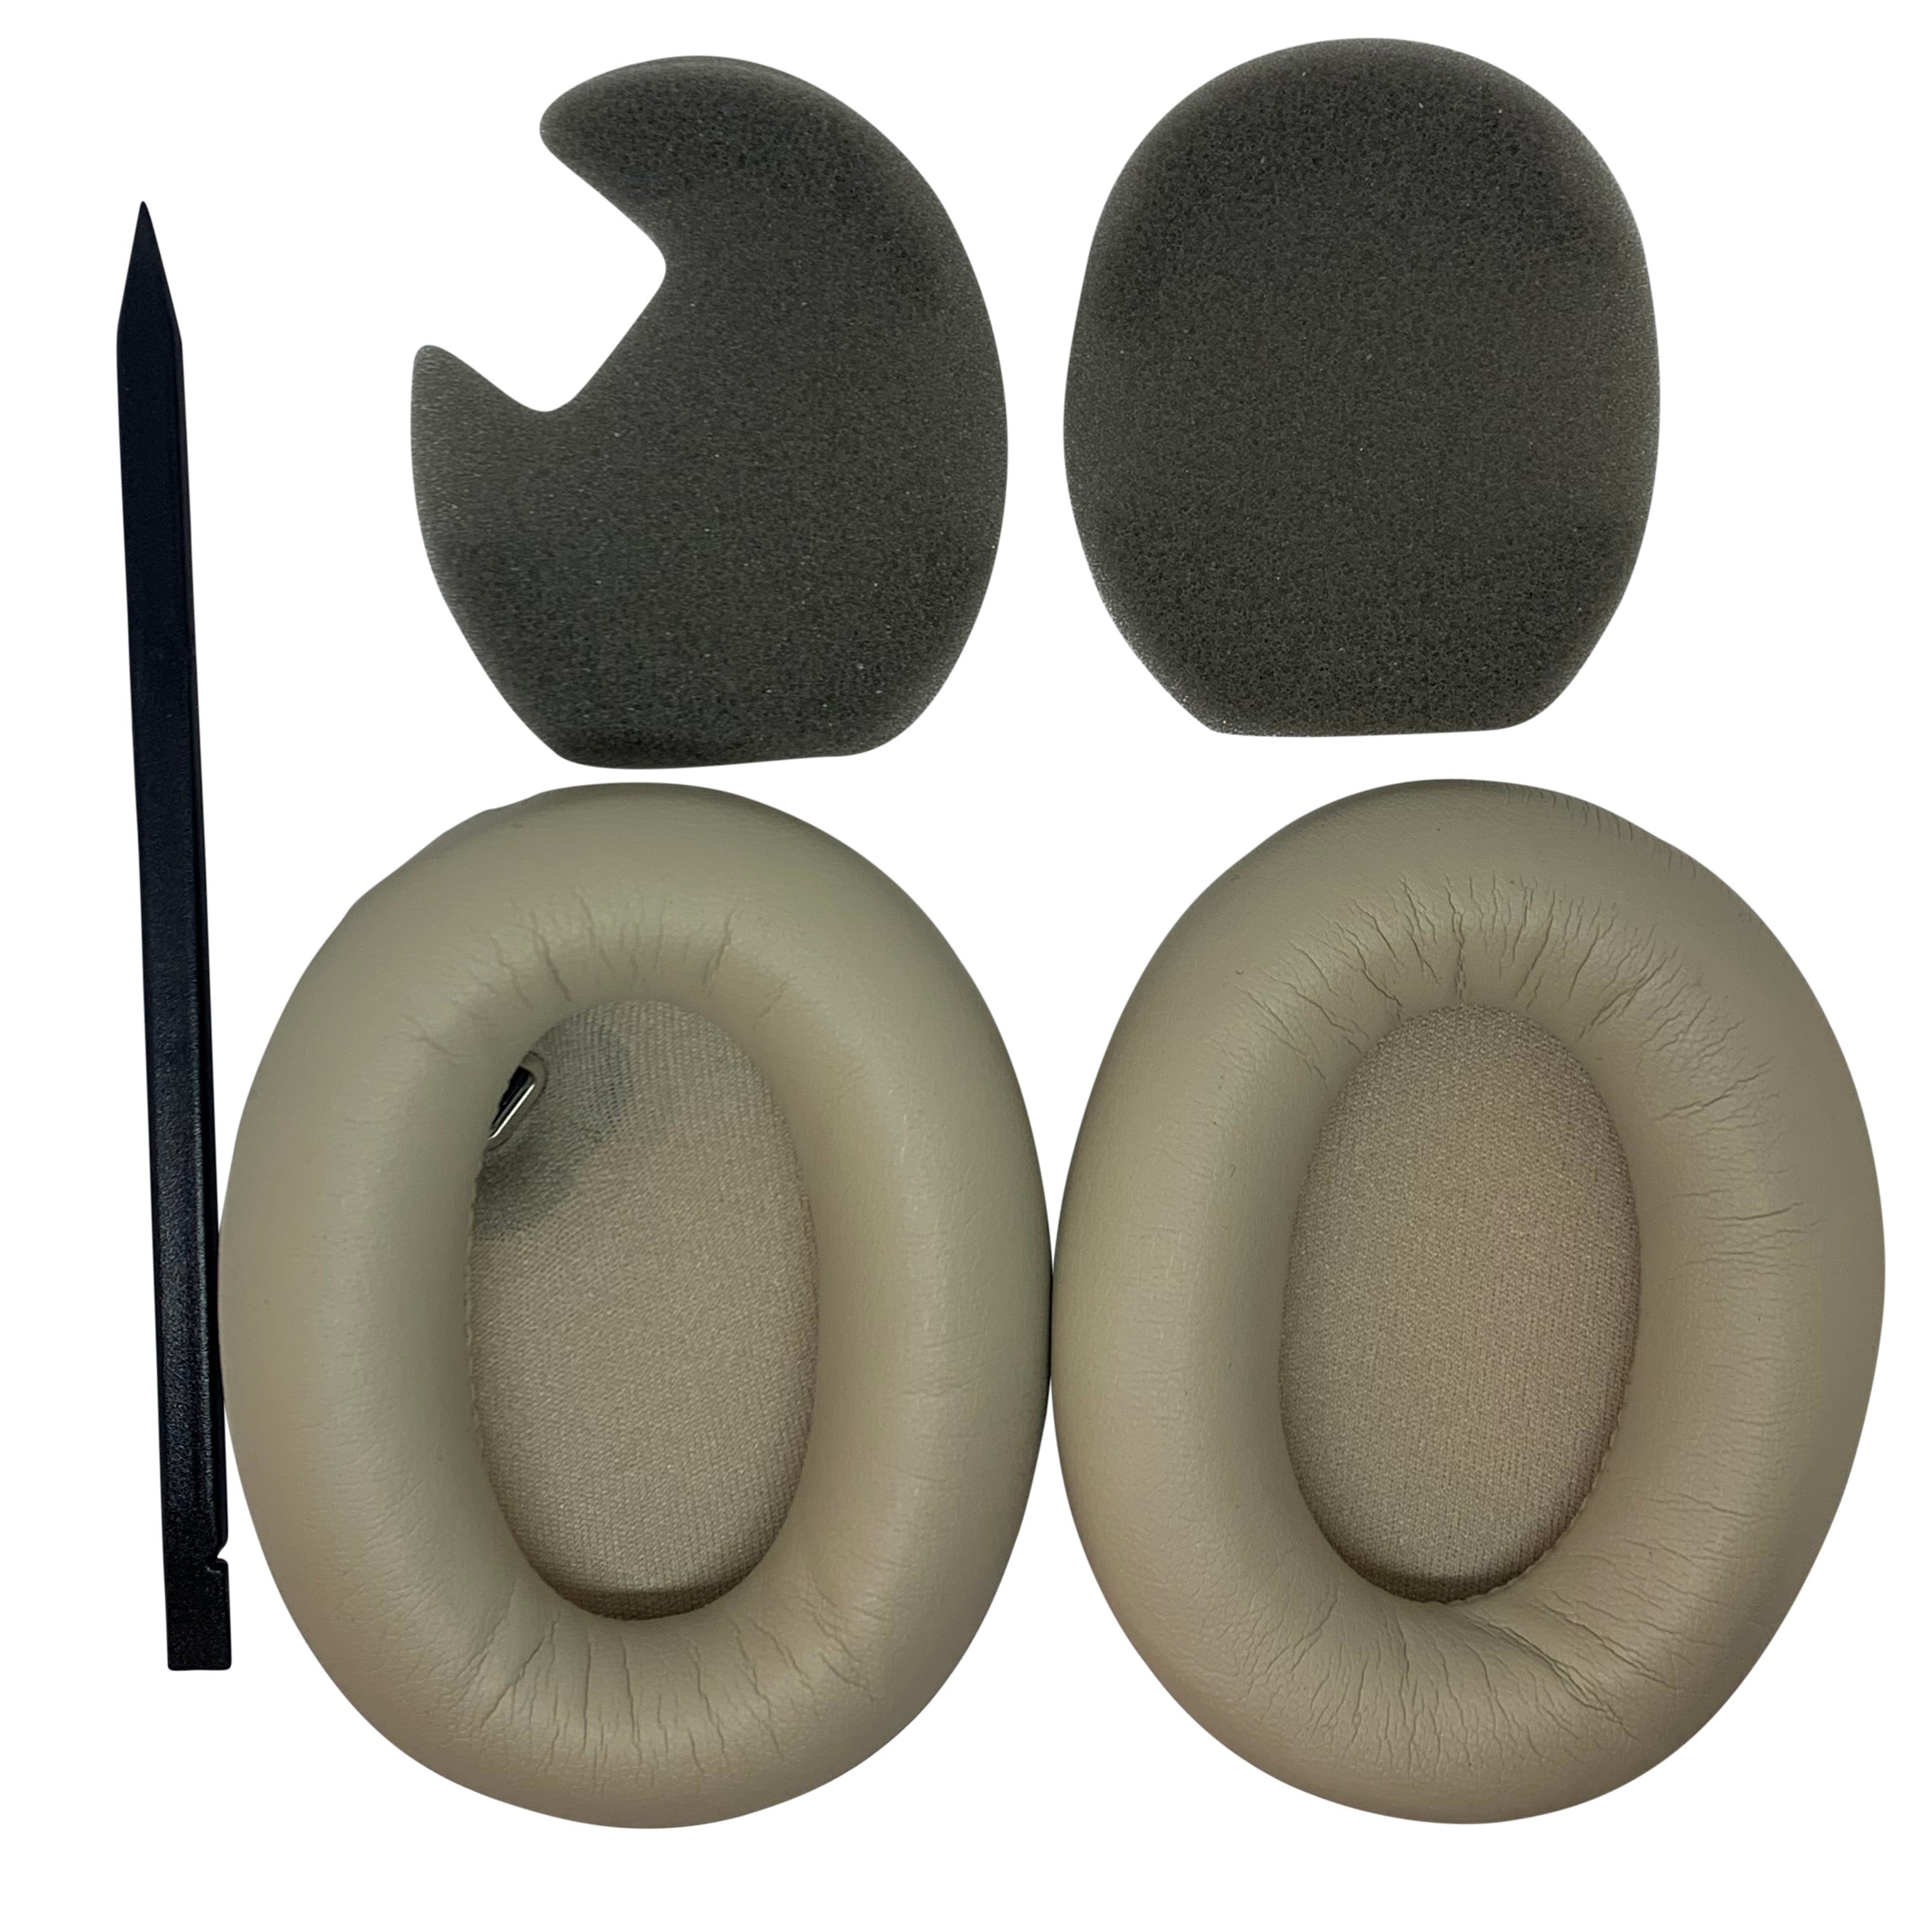 CentralSound Premium Replacement Ear Pad Cushions for Beyerdynamic DT